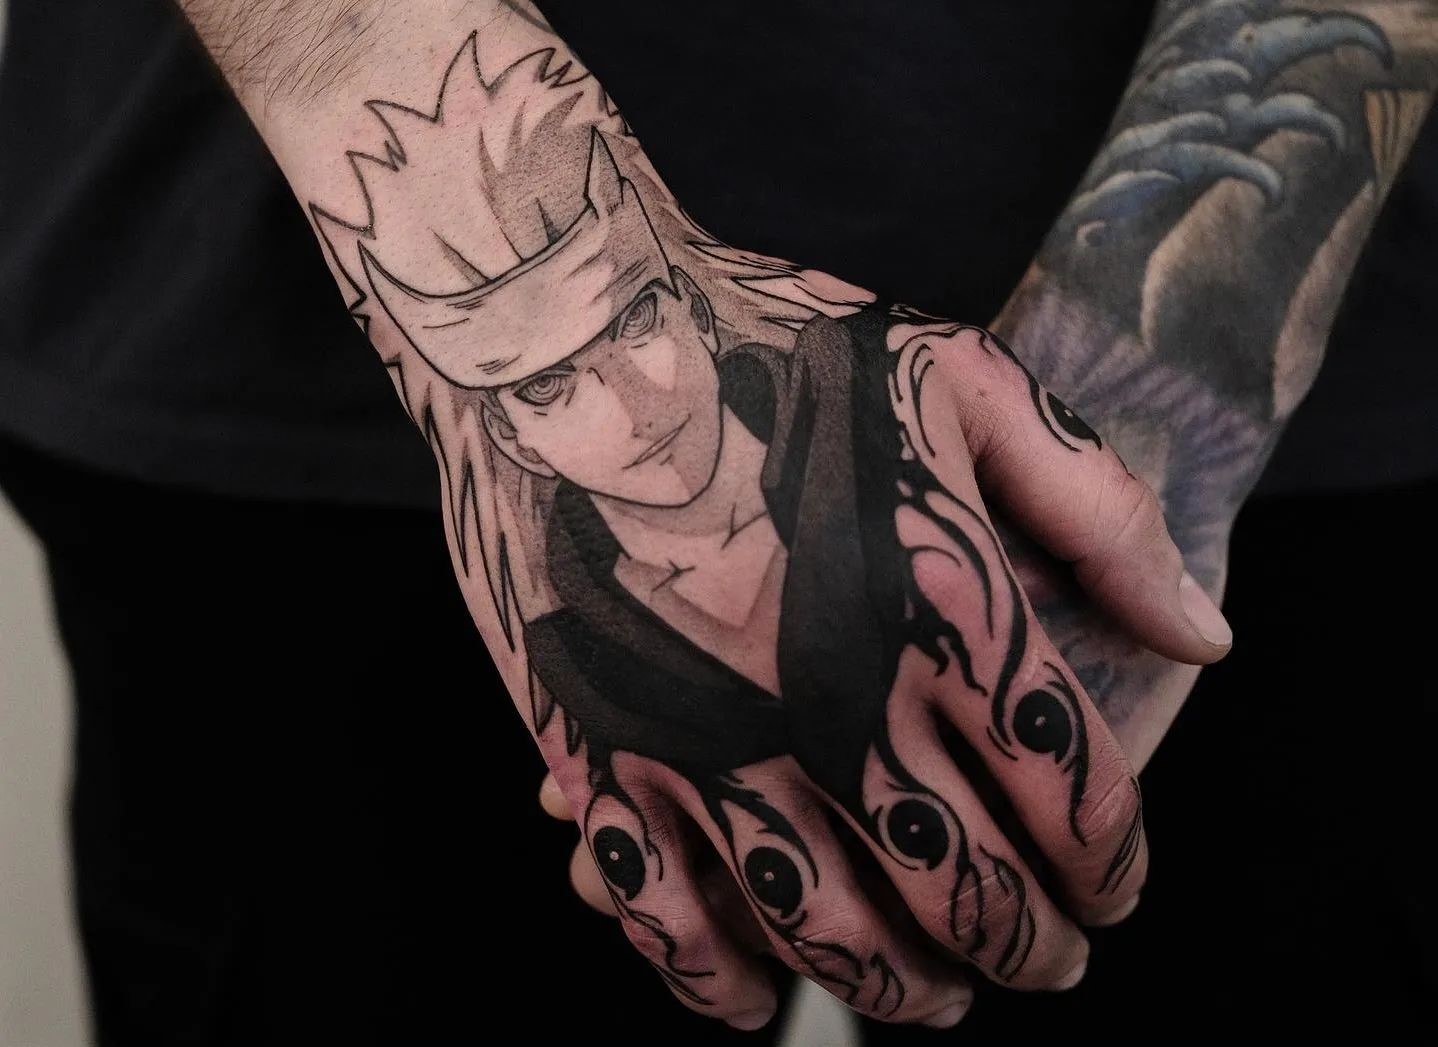 Another session down on this full anime back tattoo - YouTube